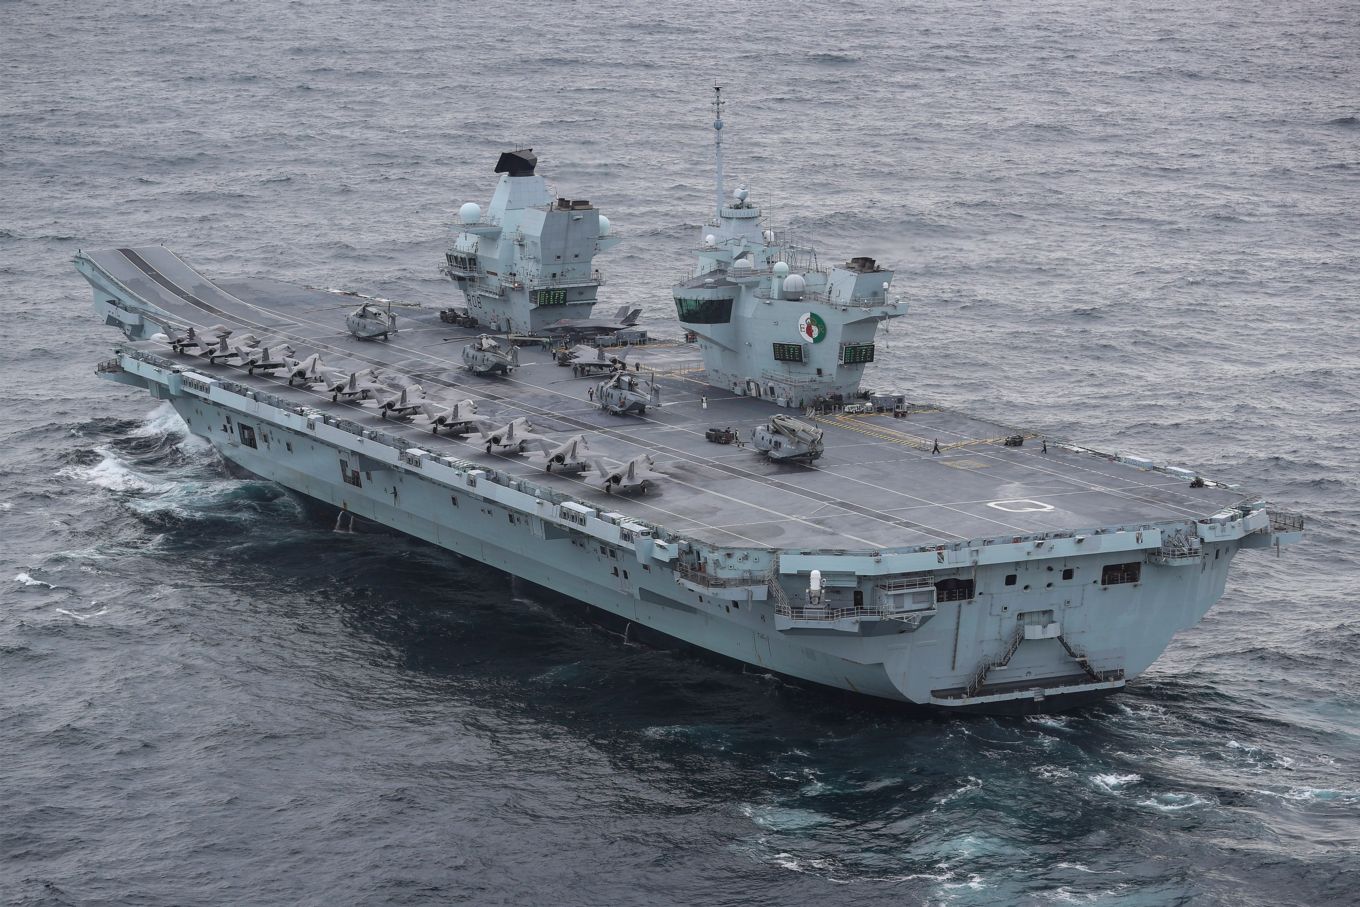 Image shows multiple F-35 aircraft on HMS Queen Elizabeth.